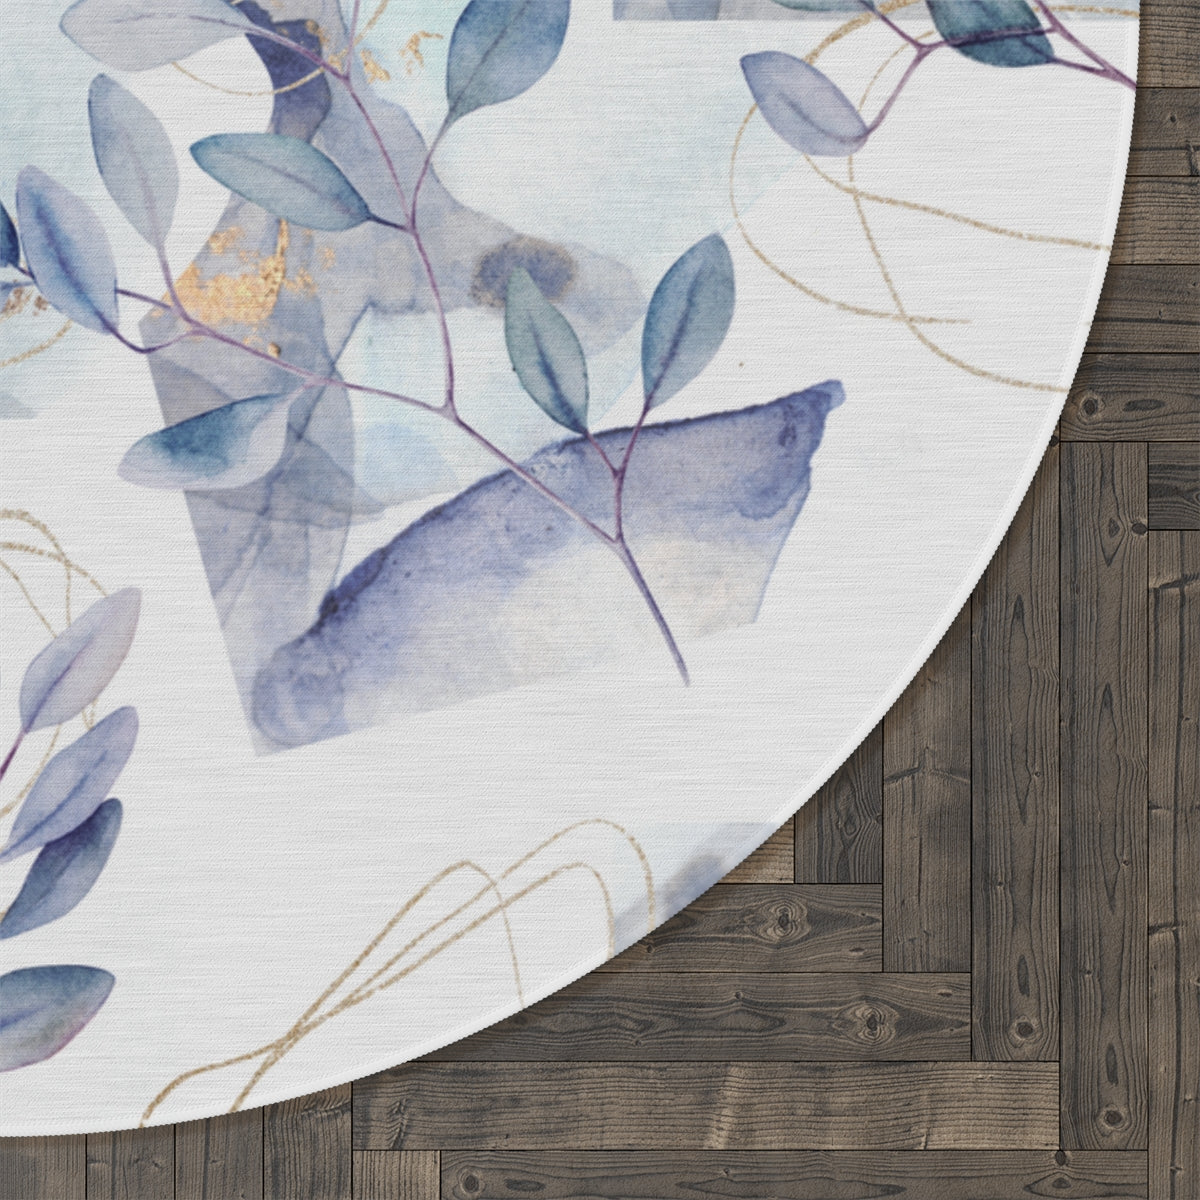 Abstract Floral Branches Round Rug